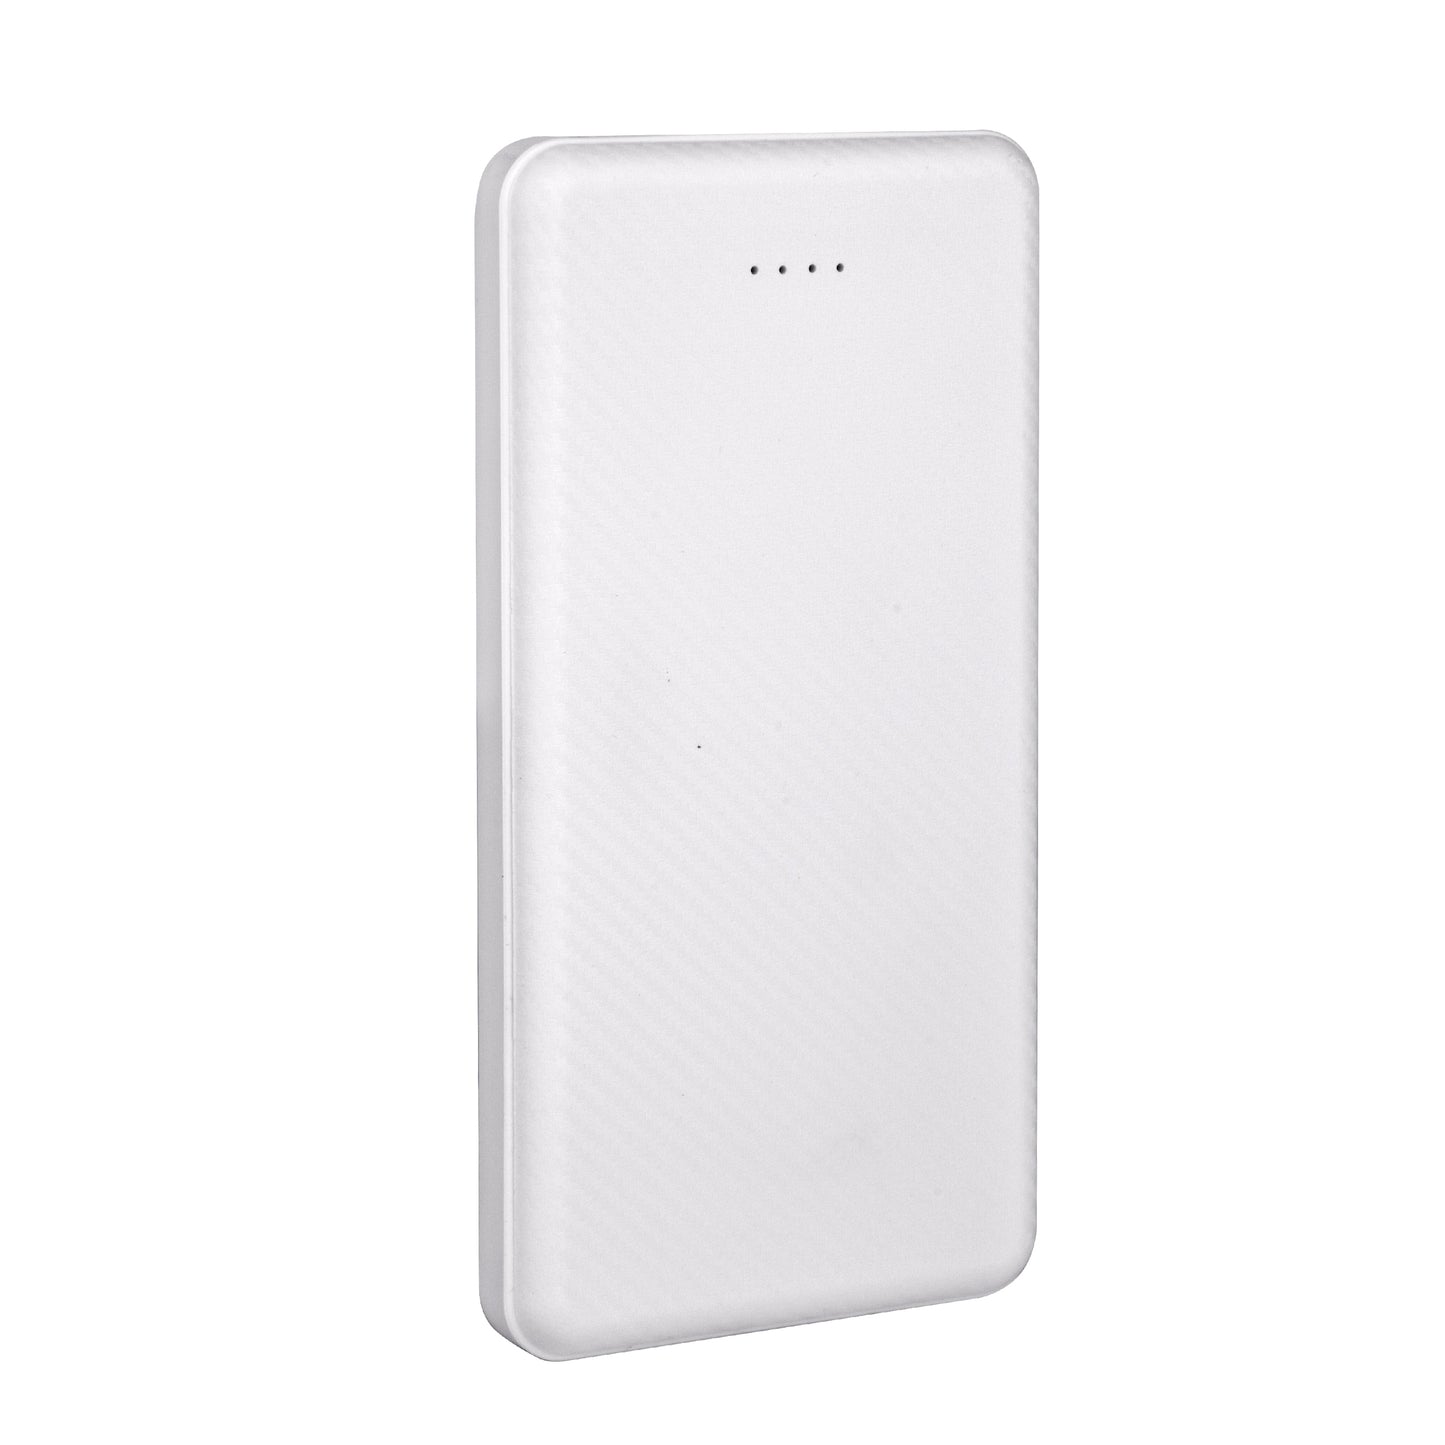 Personalized White 10000mAh Power Bank - For Corporate Gifting, Event Gifting, Freebies, Promotions - EnZest HK1216